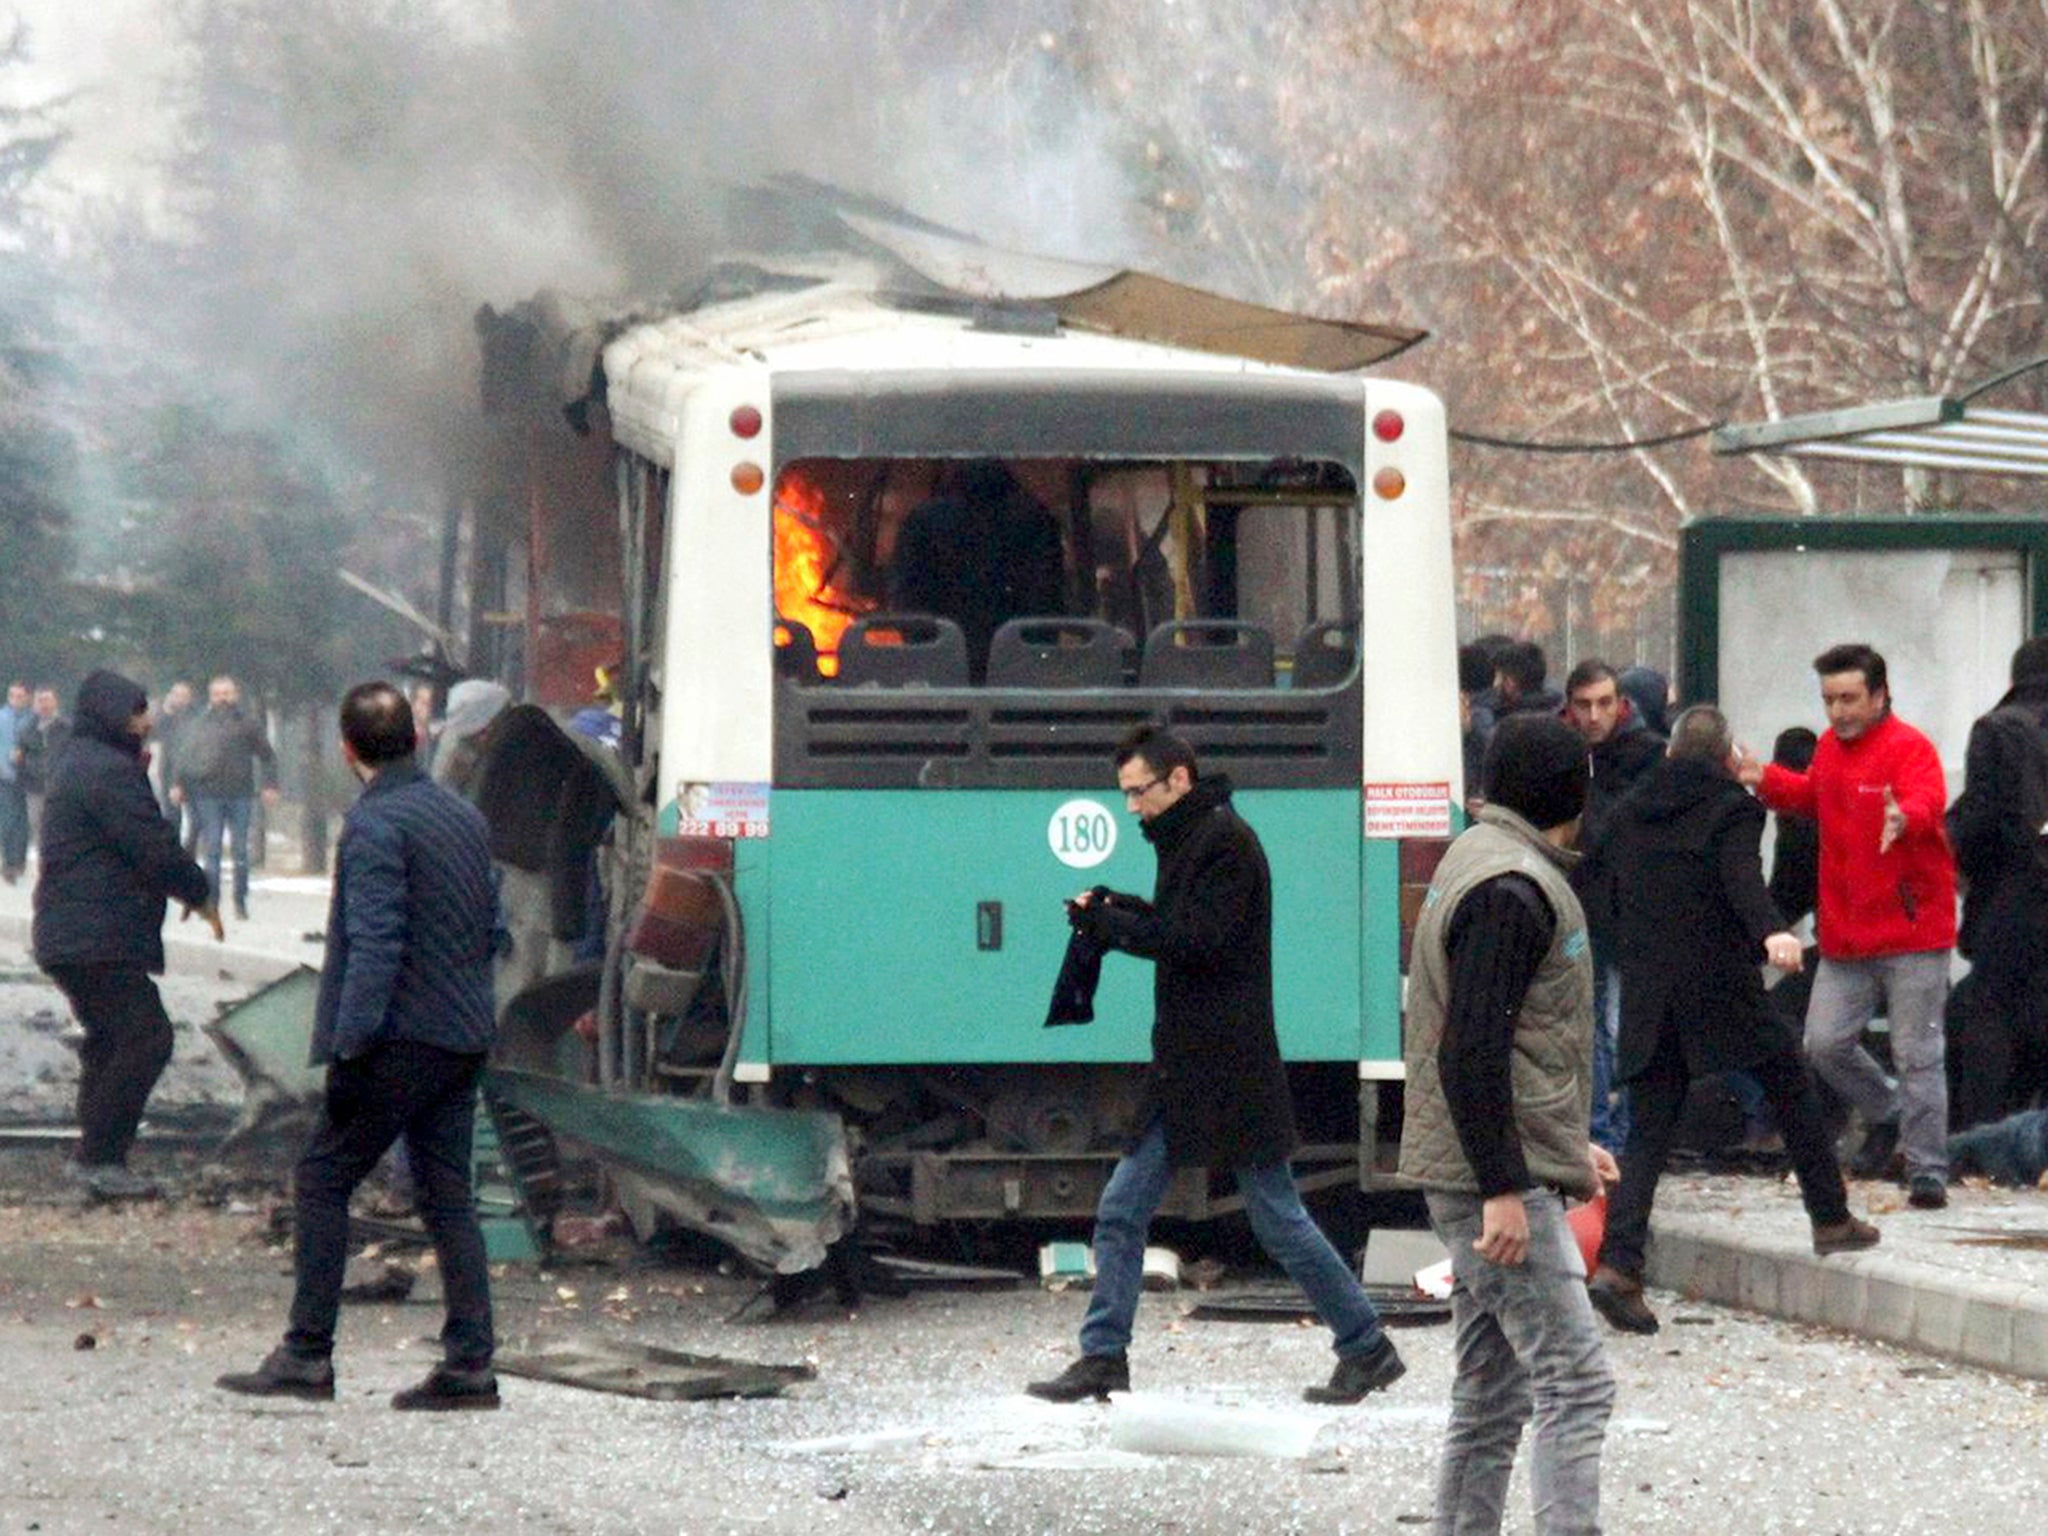 The aftermath of the explosion in Kayseri